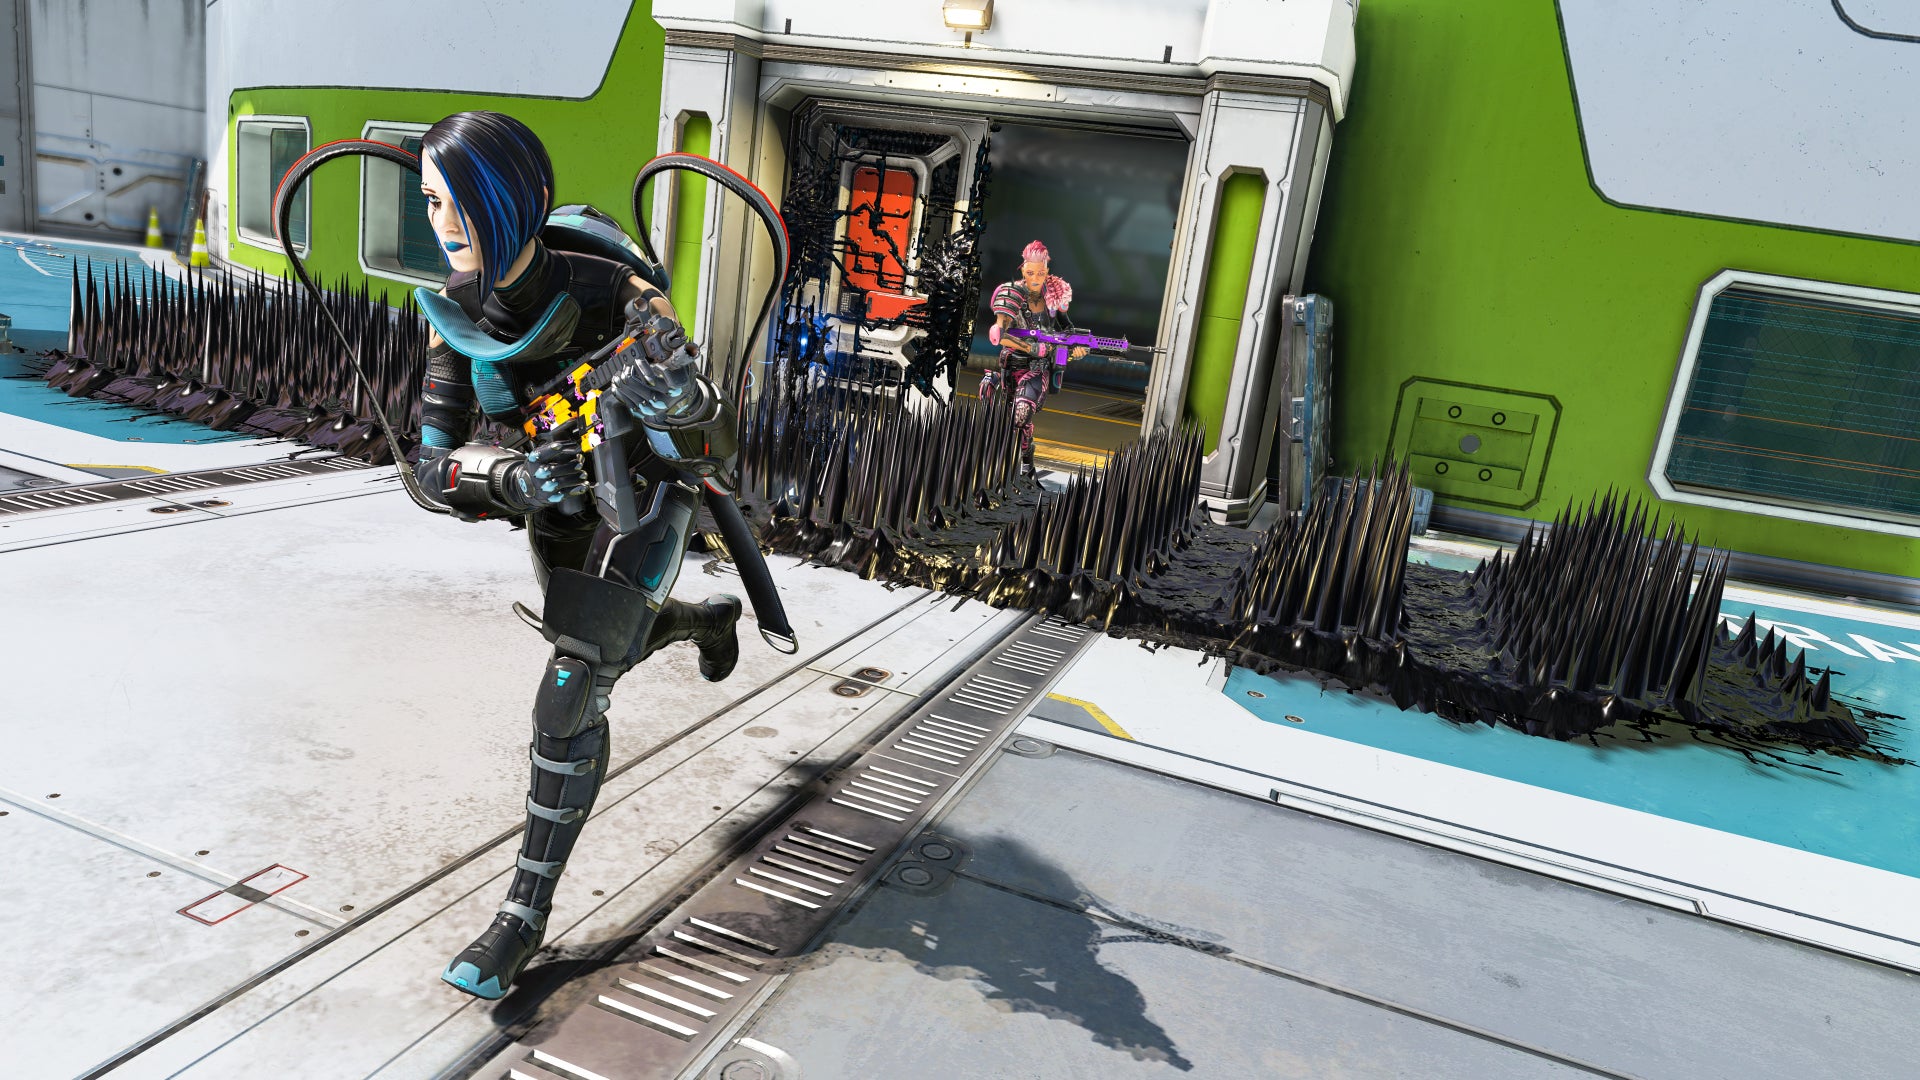 Apex Legends character Catalyst runs towards the camera, leaving behind Piercing Spikes on the floor outside a door which trap an enemy player behind her.